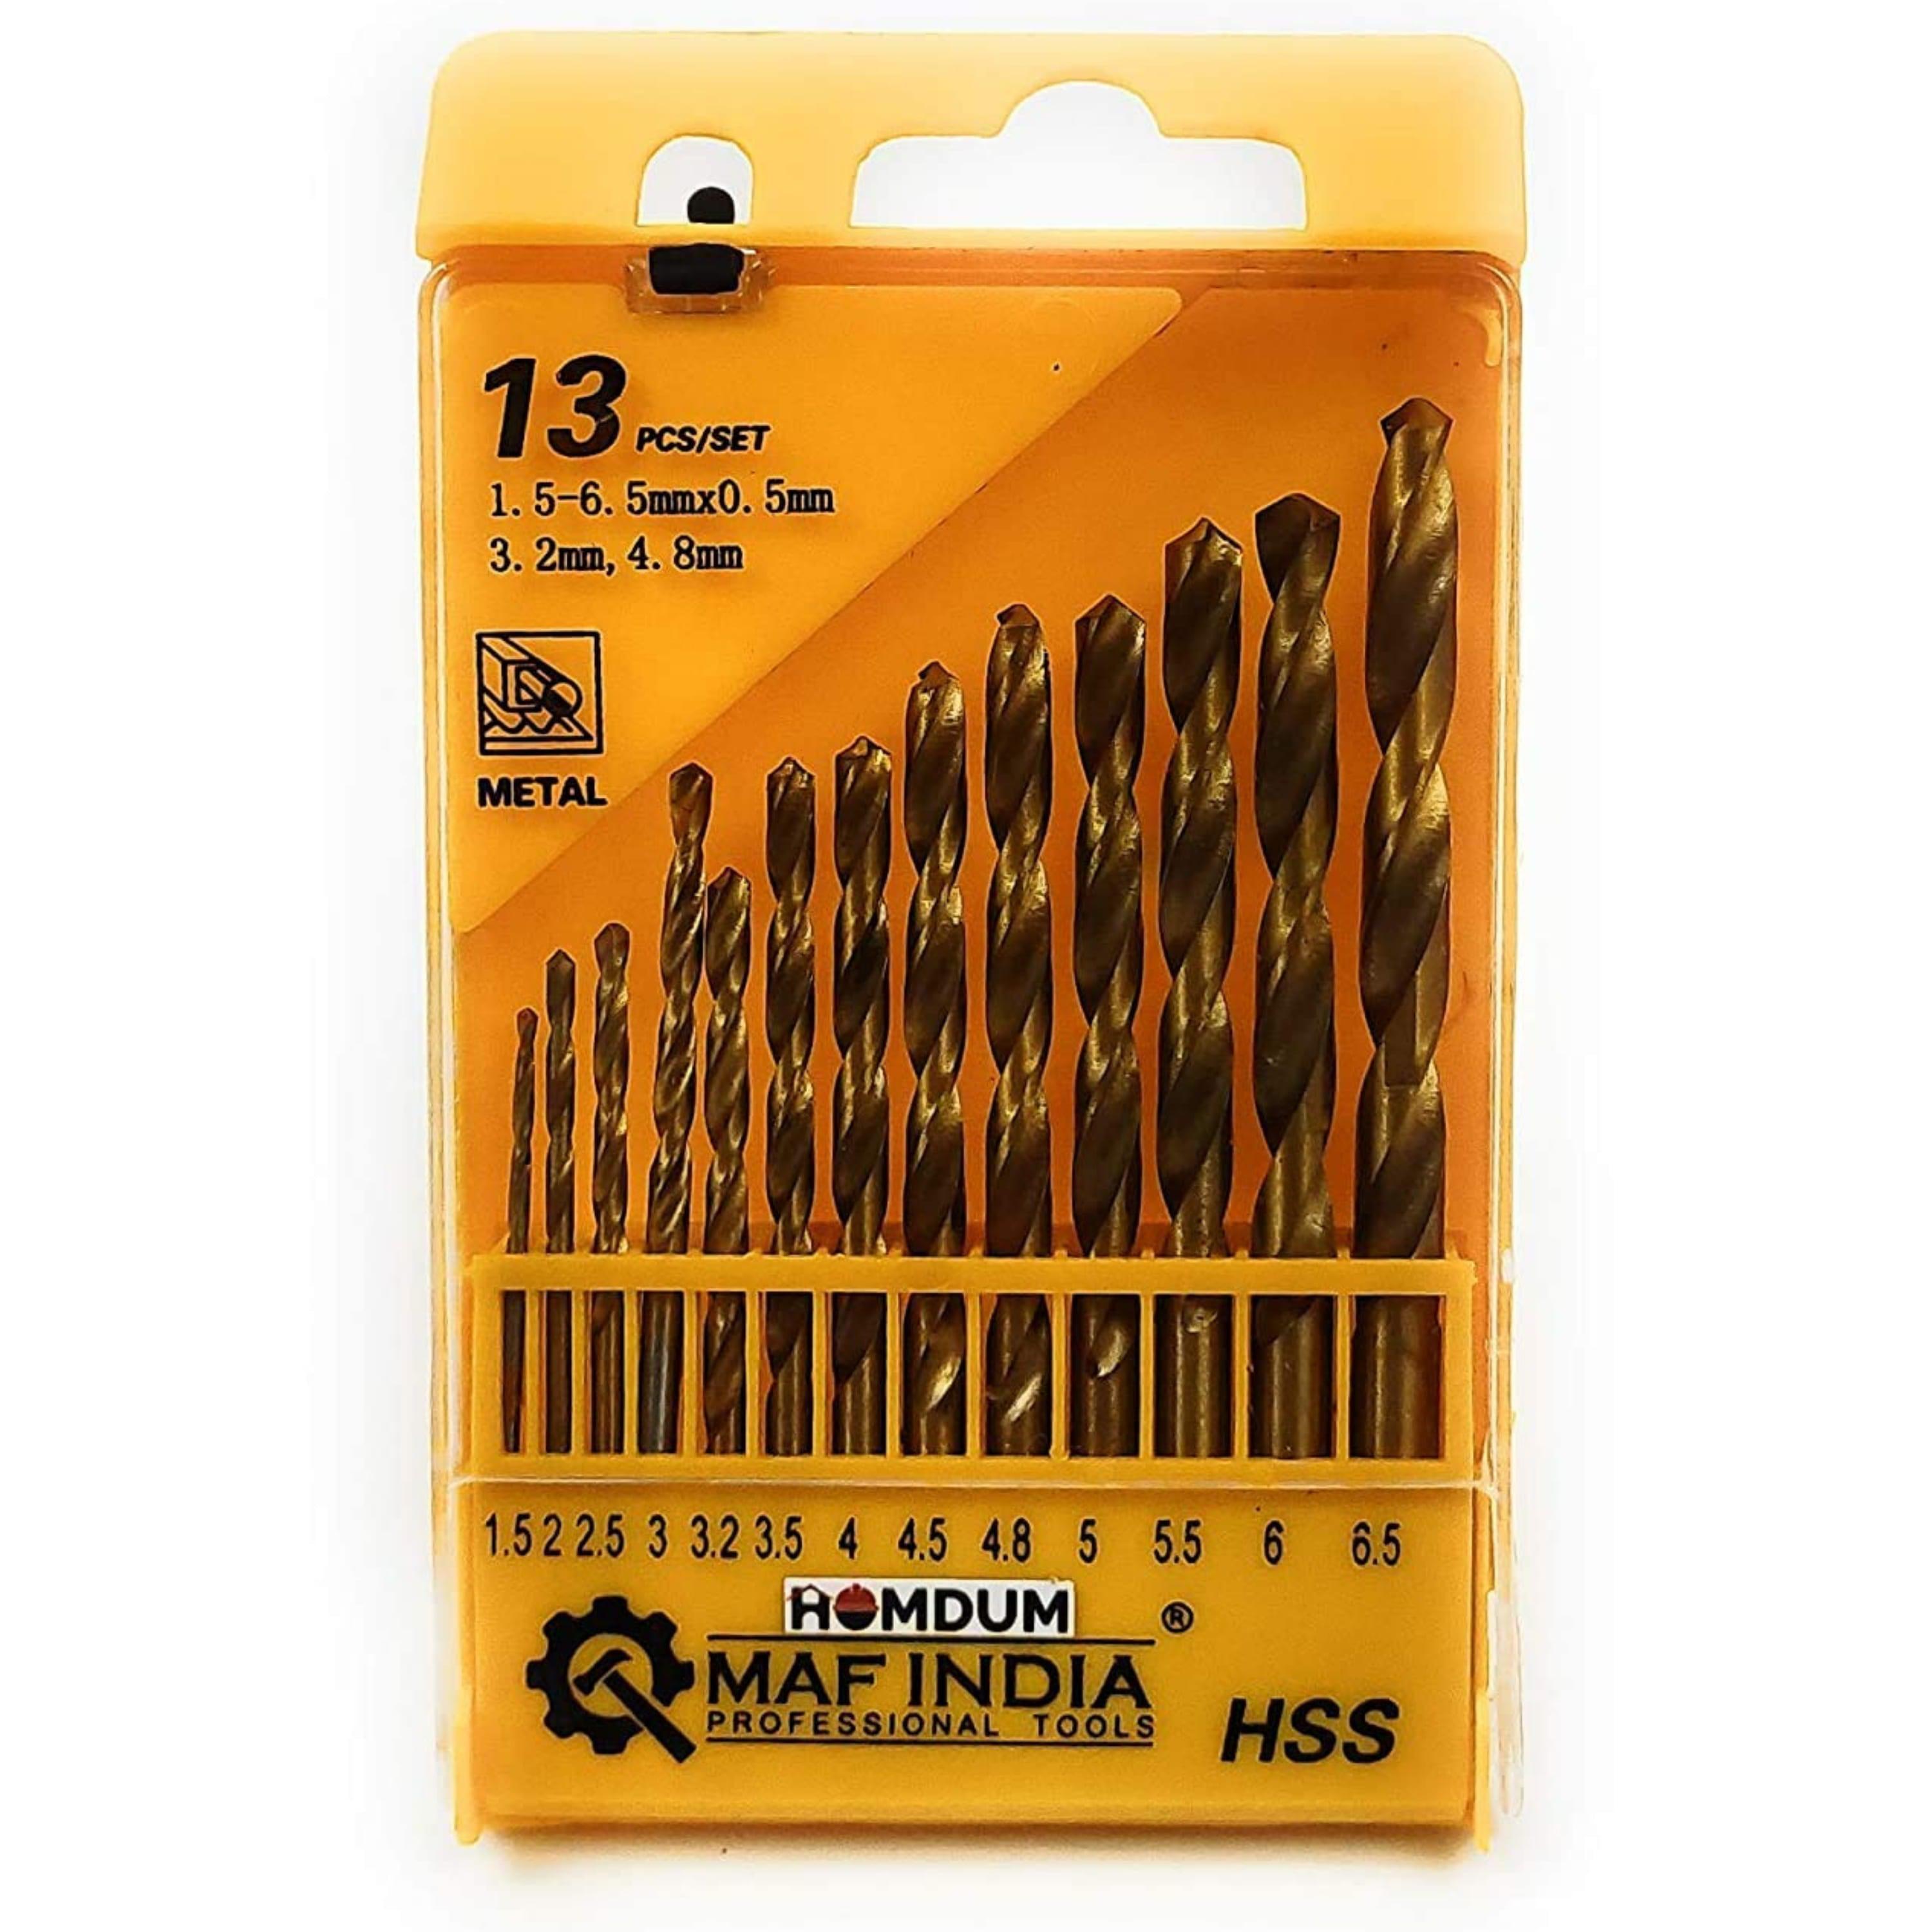 Twisted 5 Pcs Masonry Drill Bit Set for Concrete and Wall Drilling :  : Home Improvement